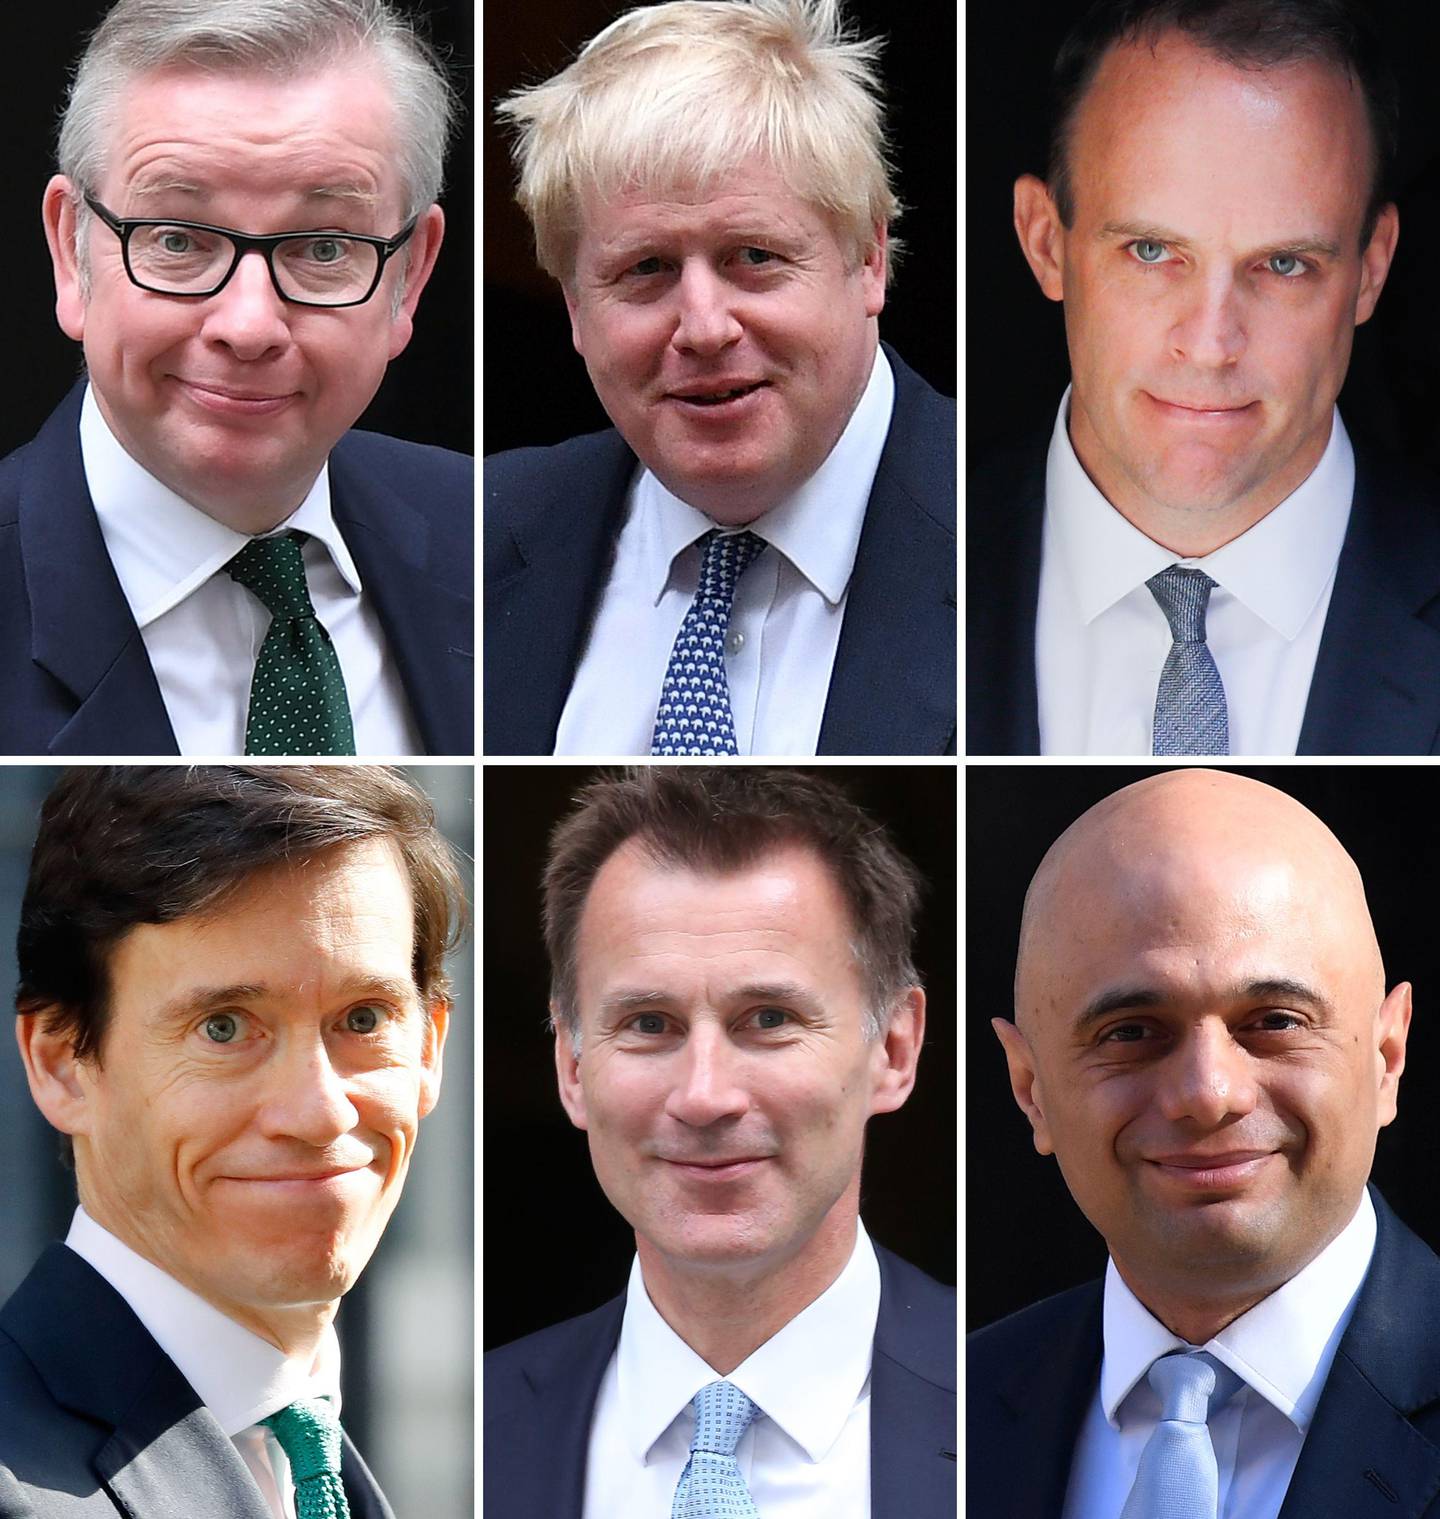 A combination of pictures created in London on June 14, 2019 shows the six contenders left in the race for leader of the Conservative party (top L-R) Britain's Environment, Food and Rural Affairs Secretary Michael Gove, former foreign secretary Boris Johnson, Former Brexit Secretary Dominic Raab (bottom L-R) Britain's International Development Secretary Rory Stewart, Britain's Foreign Secretary Jeremy Hunt and Britain's Home Secretary Sajid Javid. - The field of contenders vying to become Britain's next prime minister narrowed to six today when Health Secretary Matt Hancock withdrew from the contest. (Photo by STF / AFP)